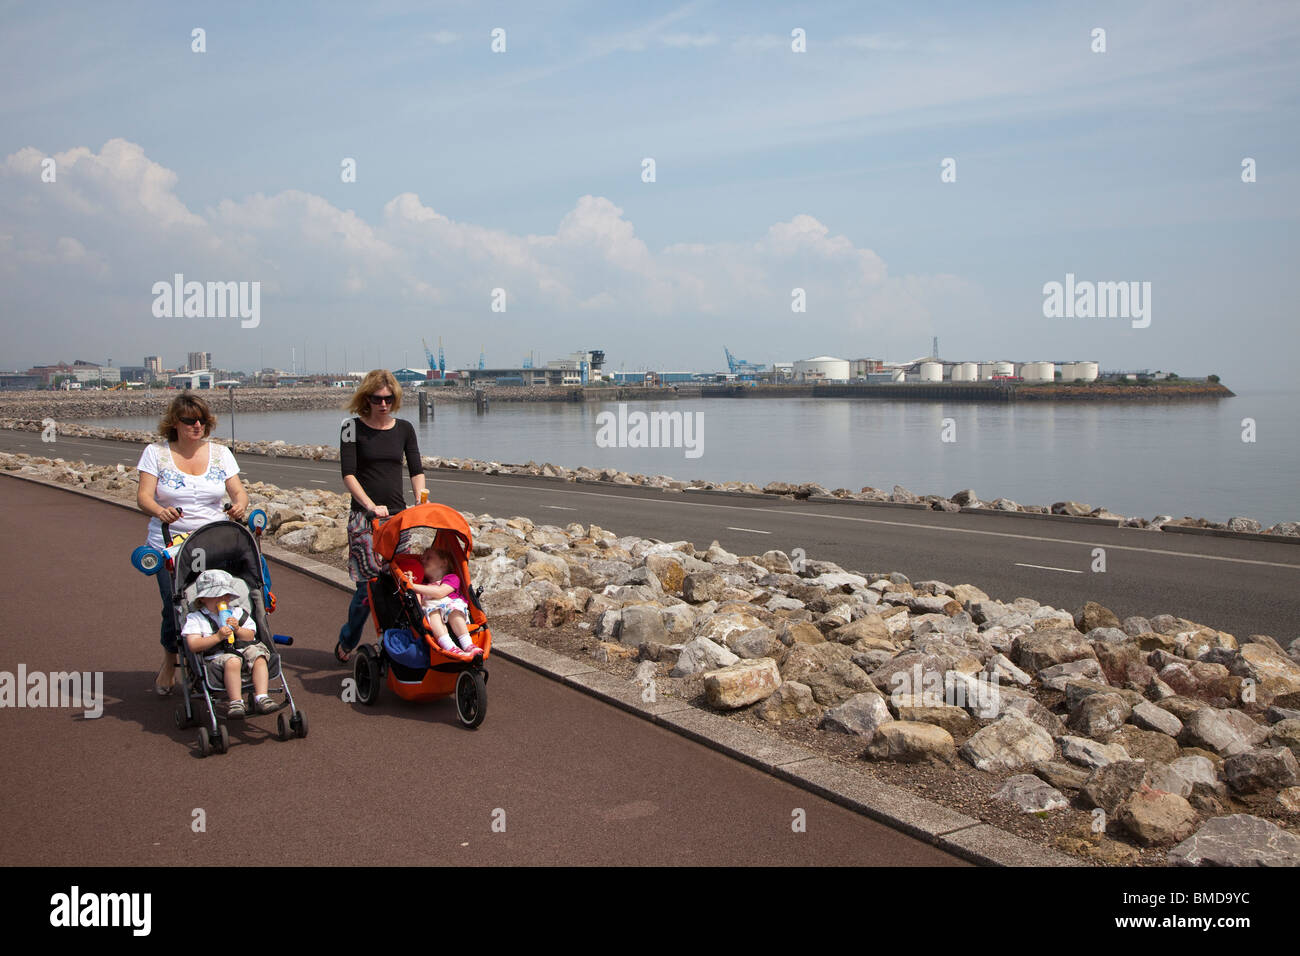 Two women pushing pushchairs walking across Cardiff Bay Barrage with oil storage tanks in docks in background Wales UK Stock Photo